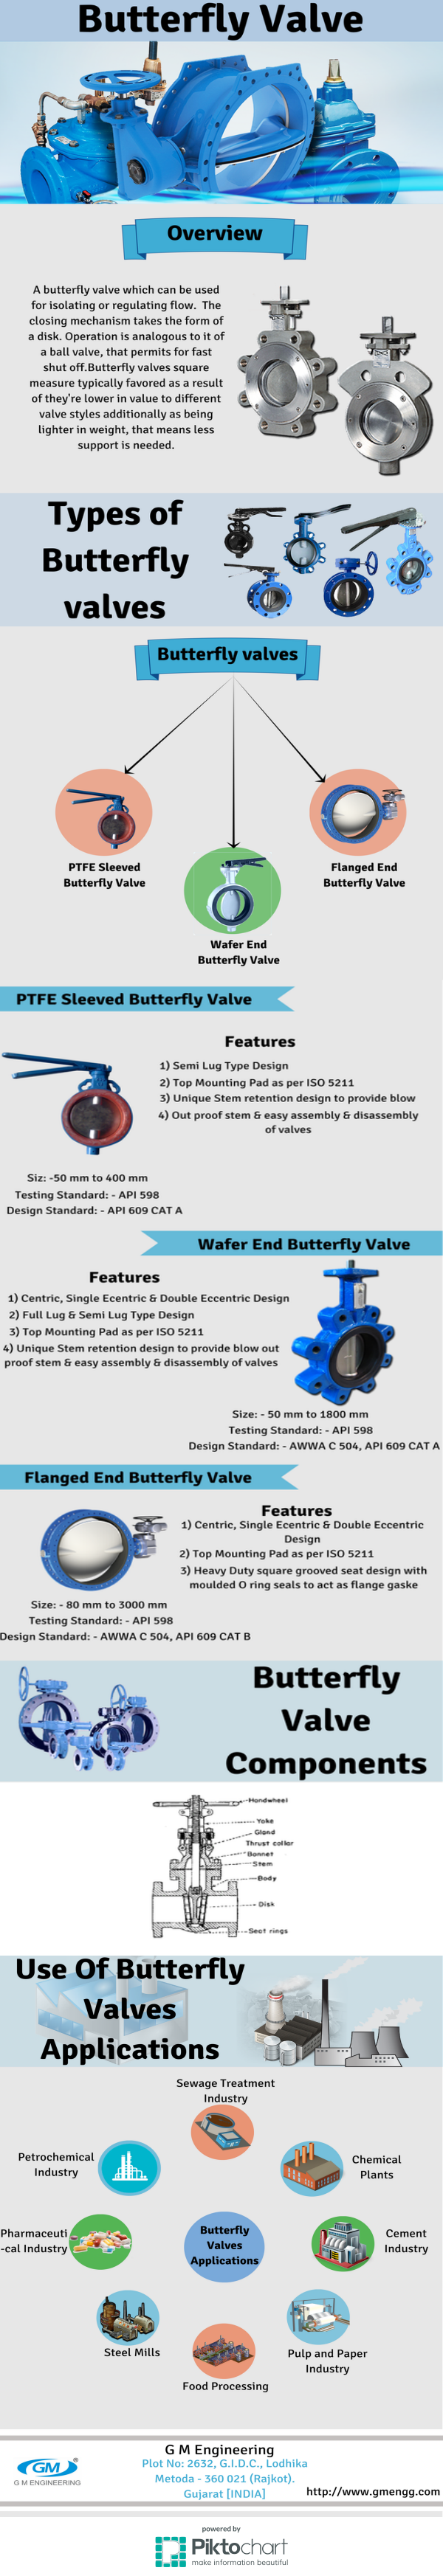 Industrial Butterfly Valves - Used For Regulating Or Isolating Flow